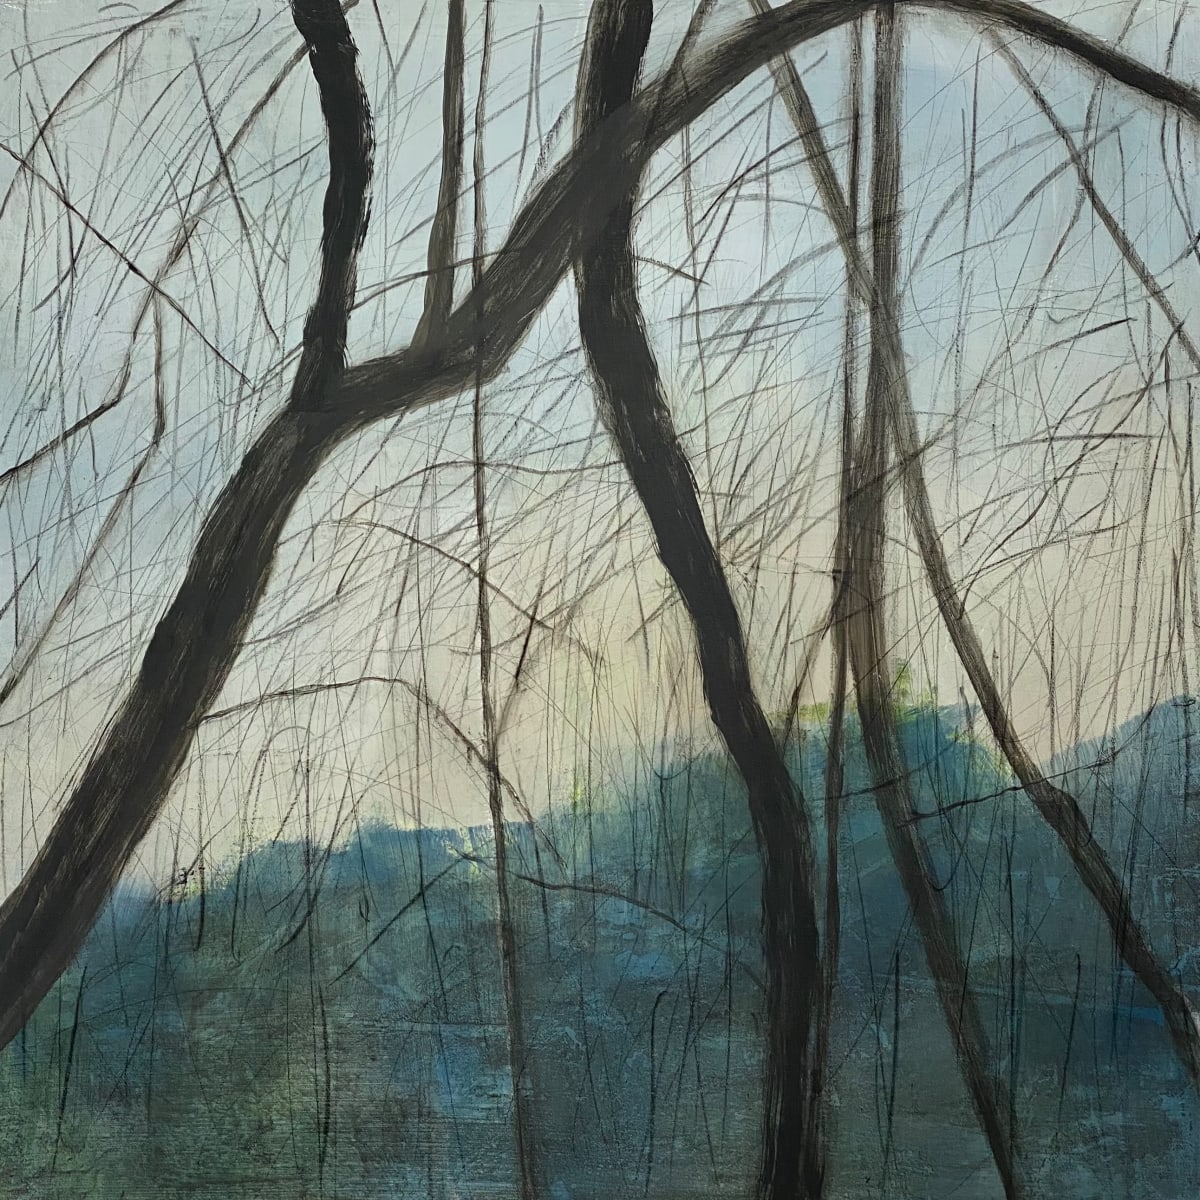 2211, Juanita Bellavance, Chestatee 36, From the Chestatee River portfolio, 2021, Acrylic and graphite on canvas, 24 x 24 inches 